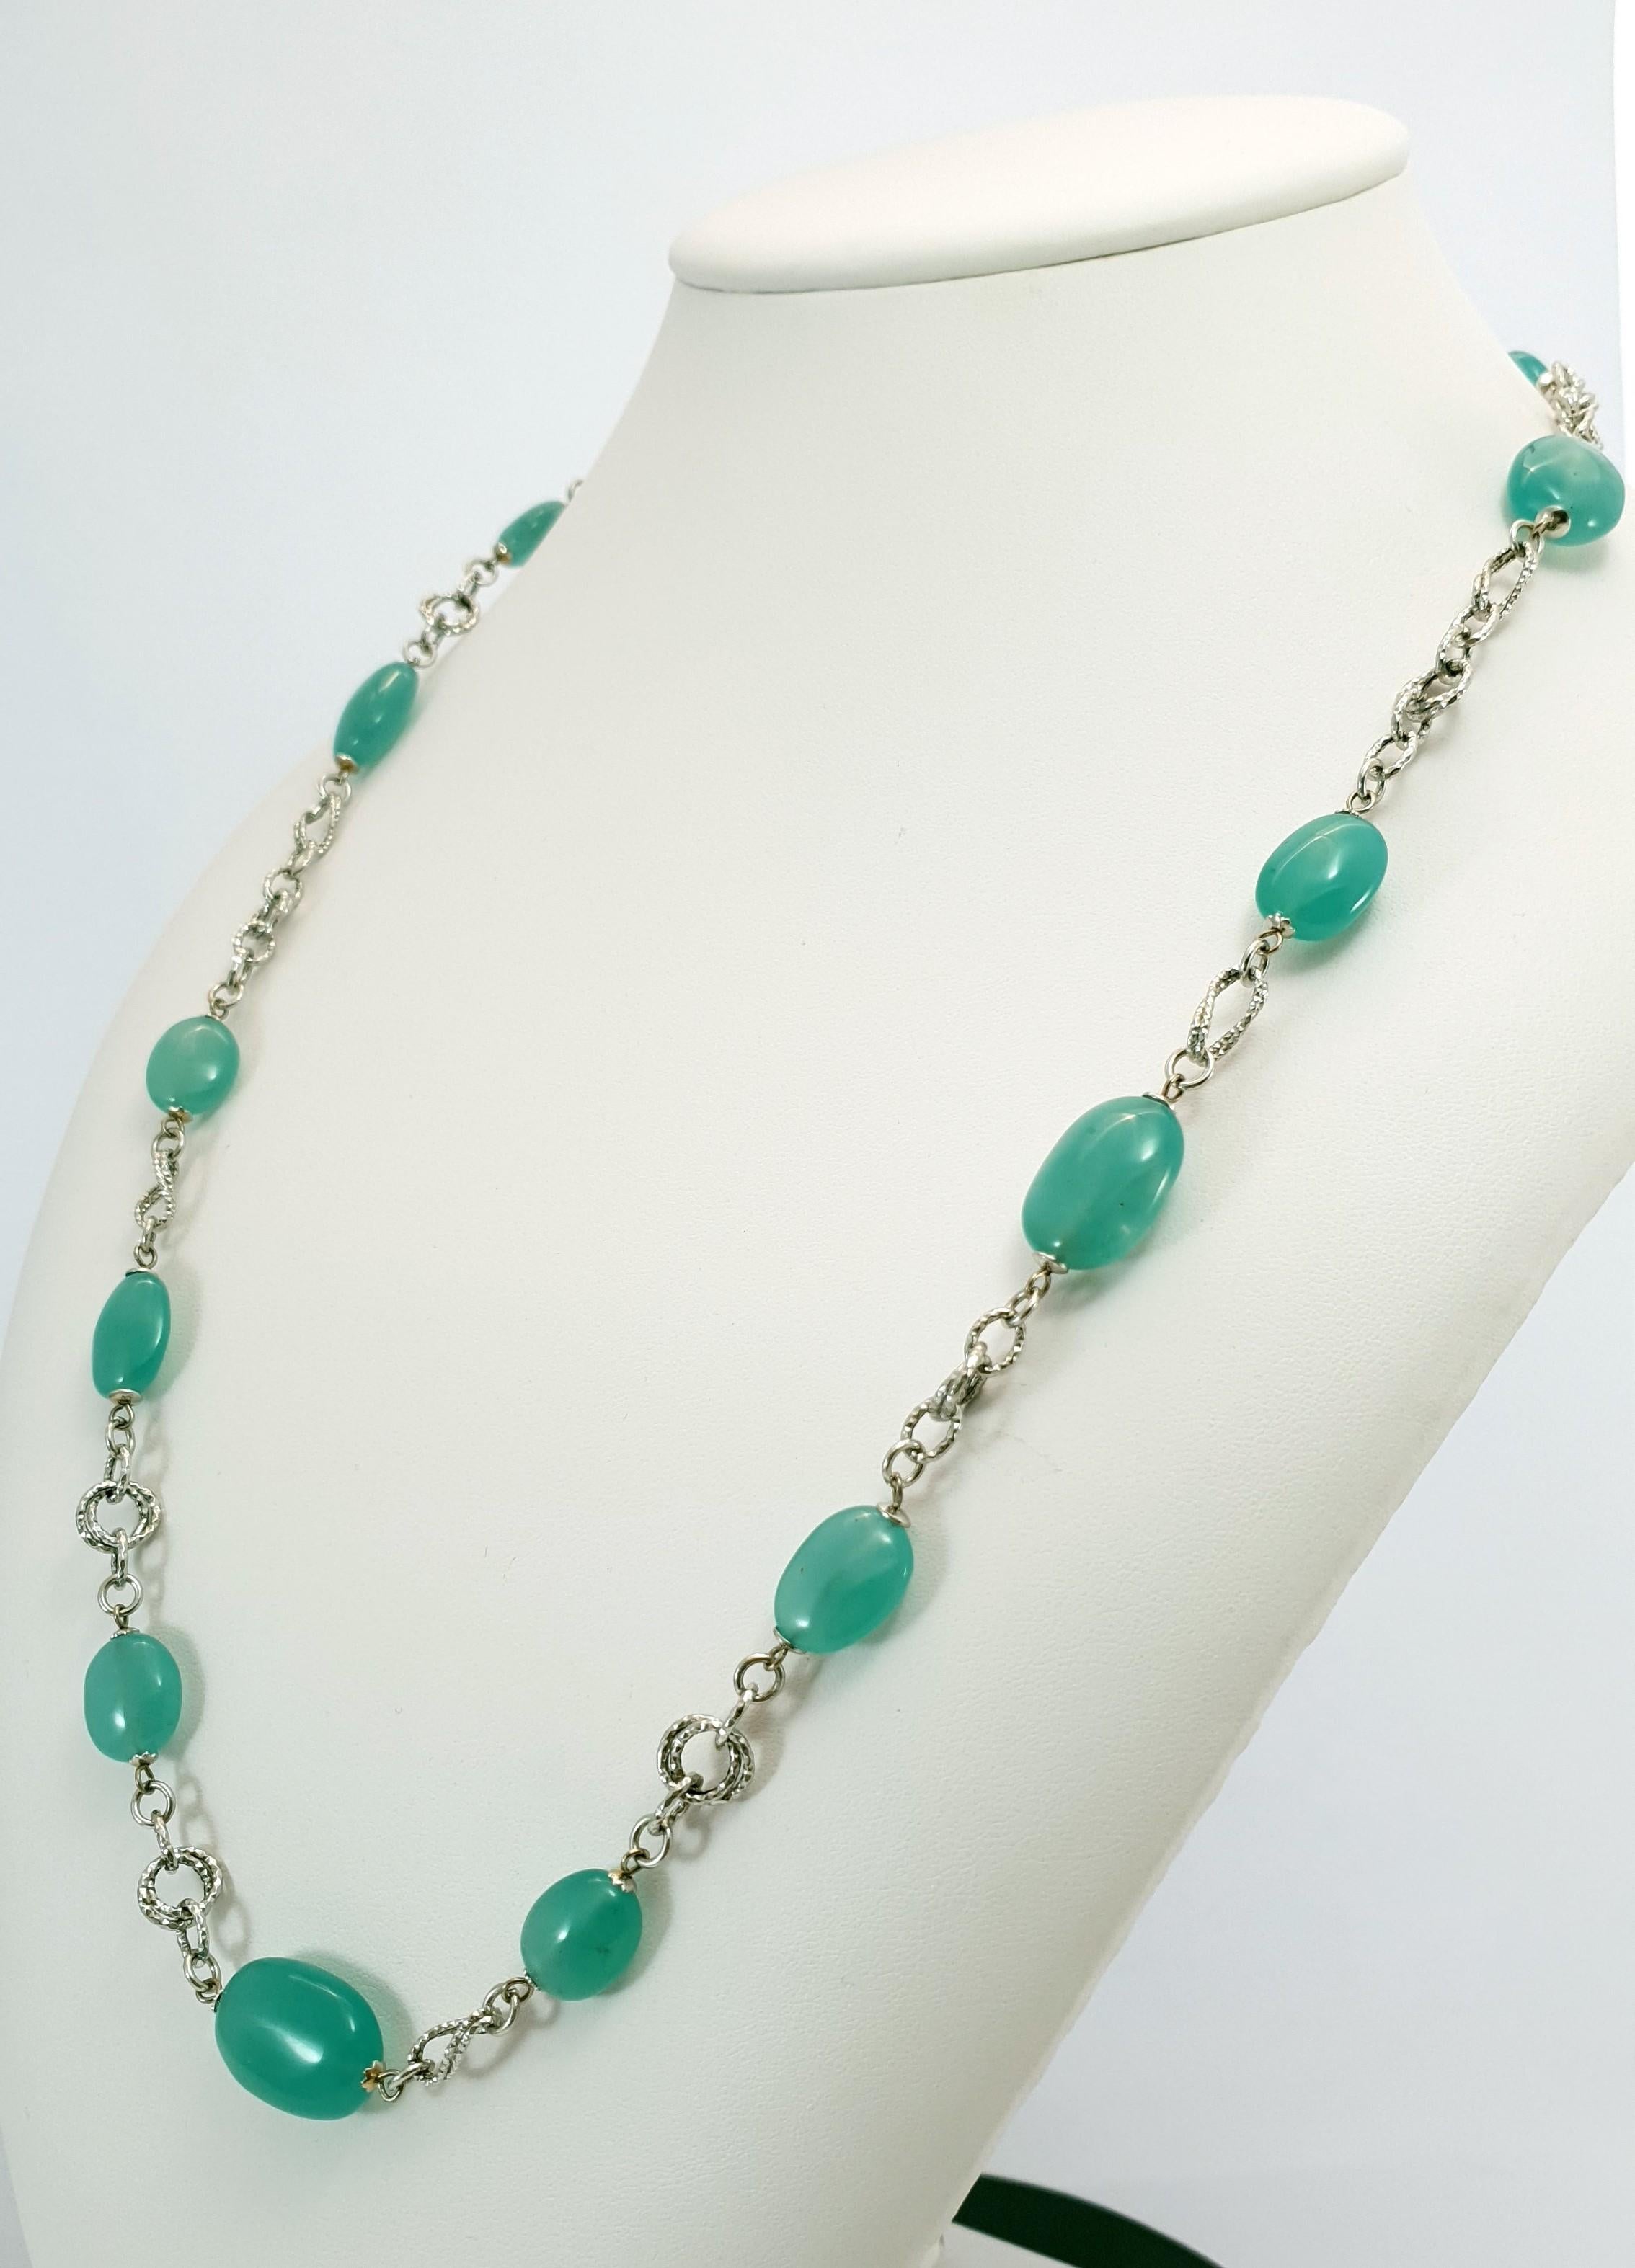 Green Chalcedony Baroque Bead Necklace with 18 Carat White Gold For Sale 4